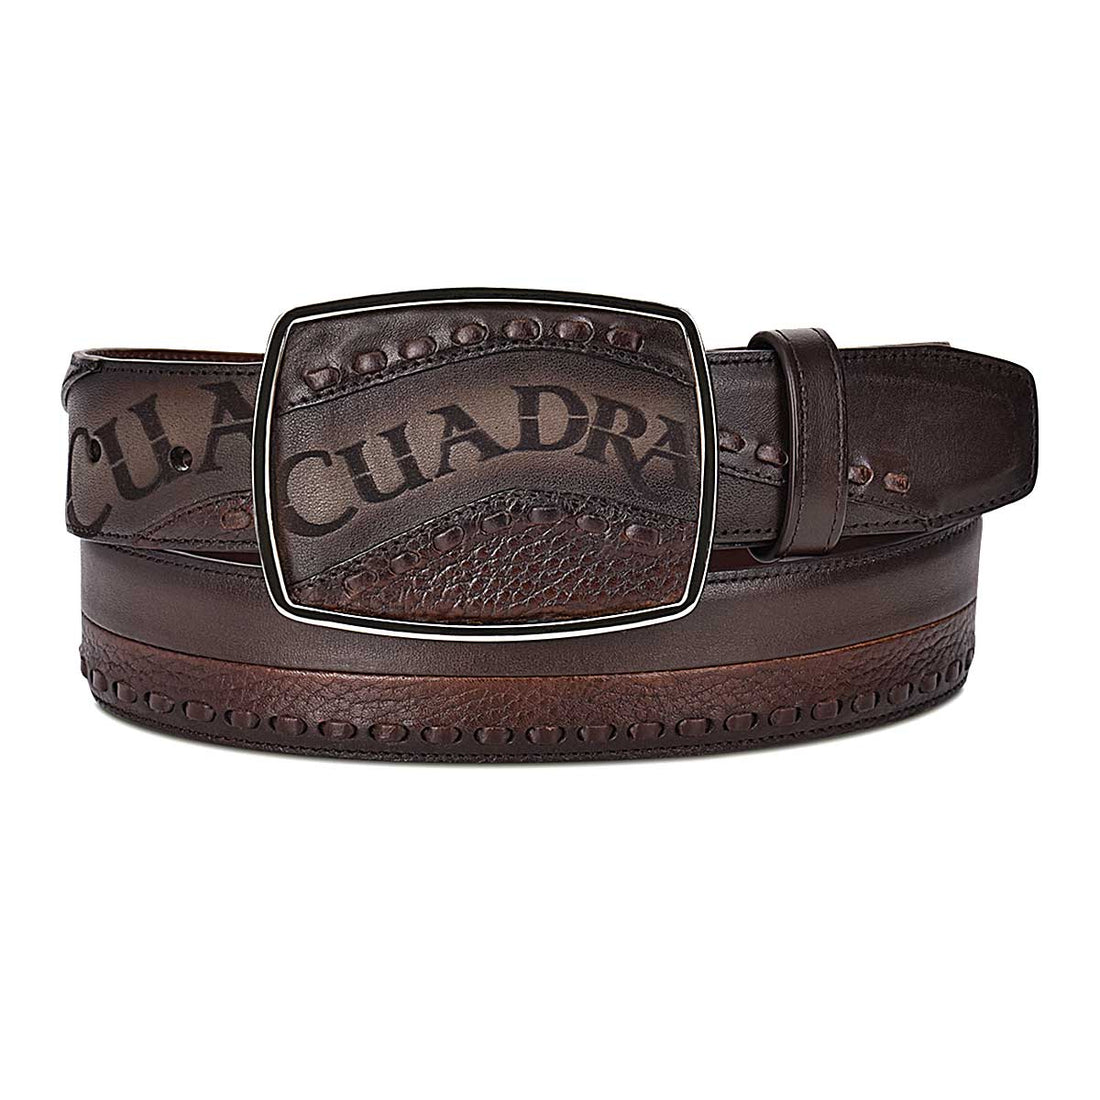 Hand-painted chocolate brown leather western belt - CV487RS - Cuadra Shop